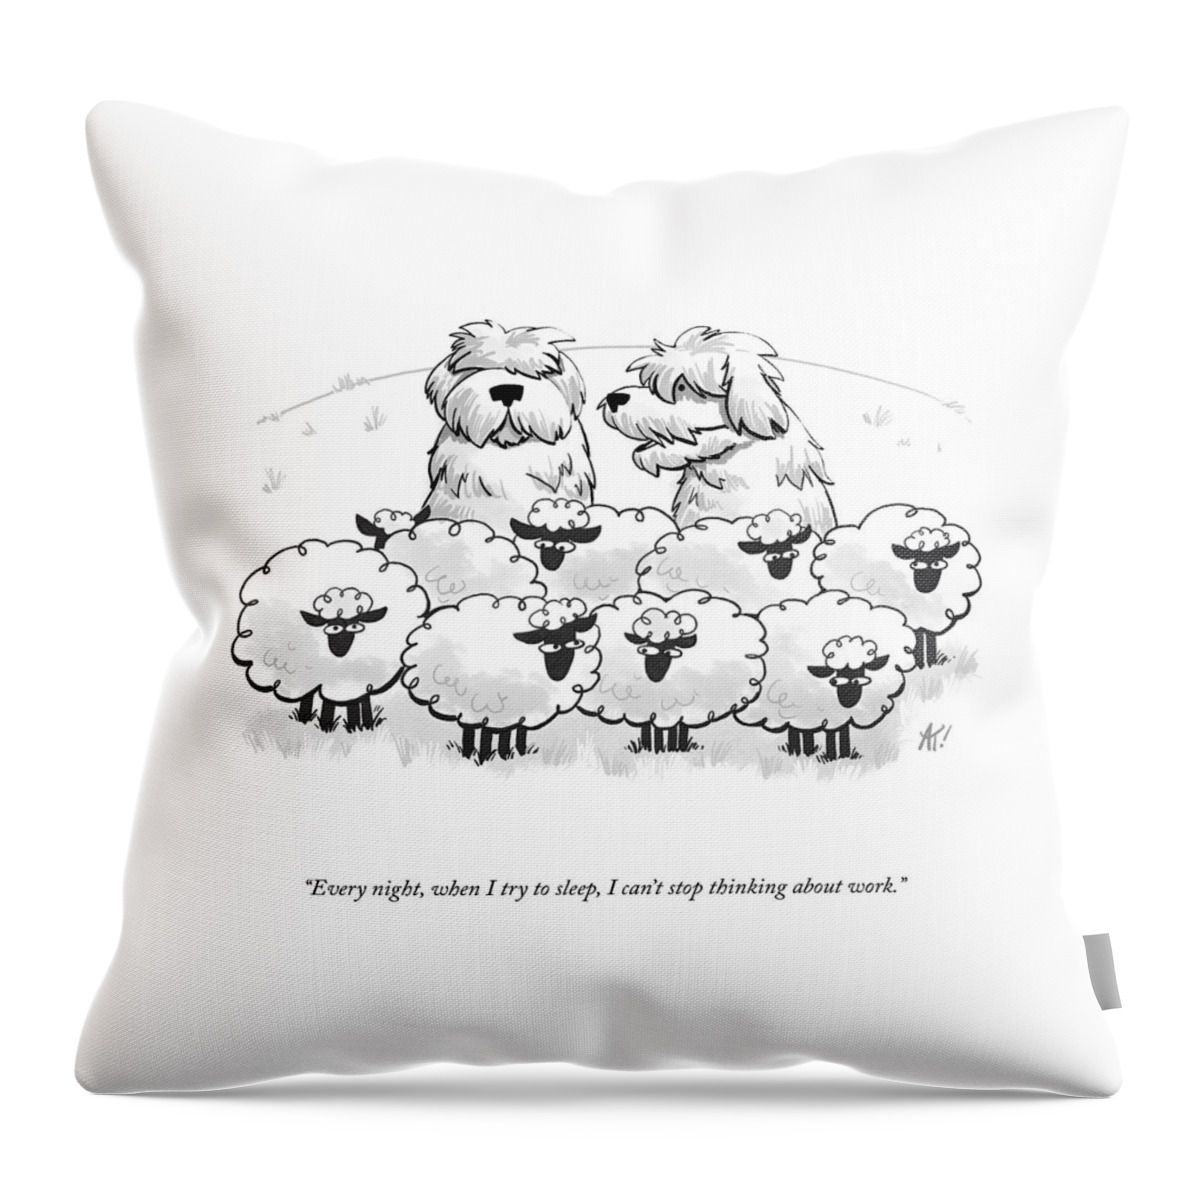 I Can't Stop Thinking About Work Throw Pillow